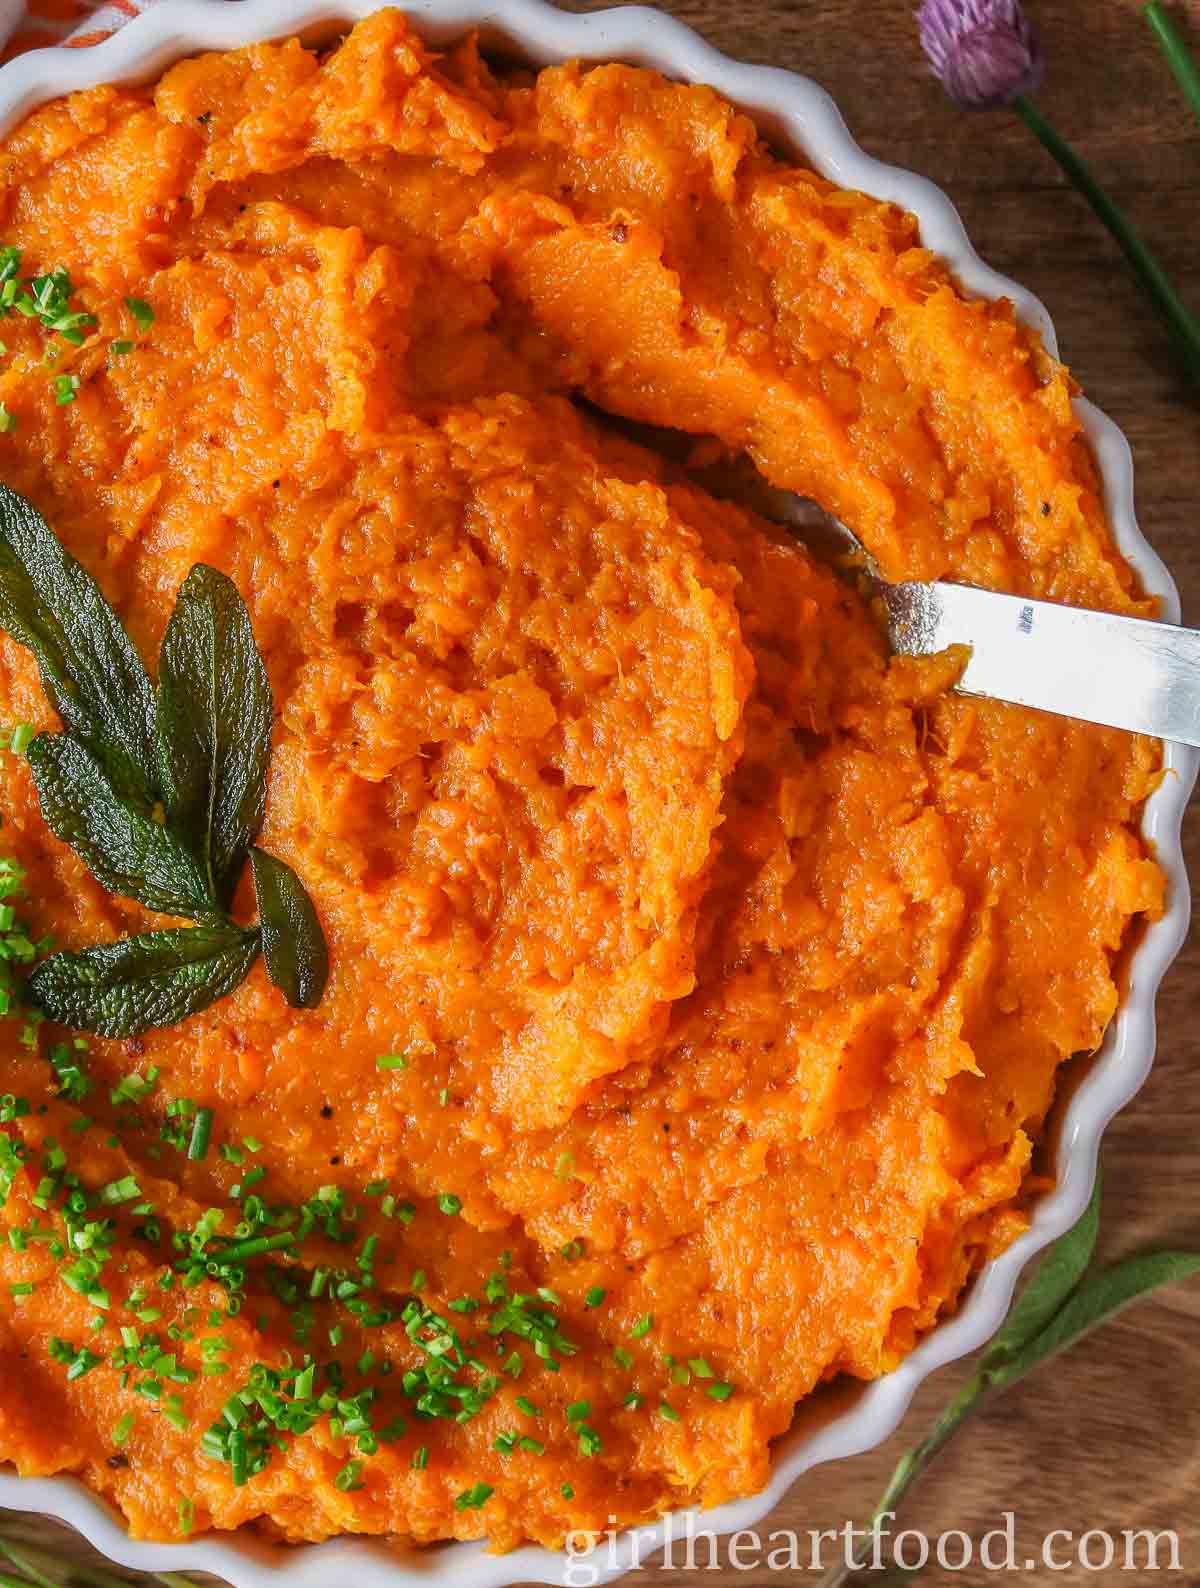 Dish of butternut squash sweet potato mash with a serving spoon dunked into it.